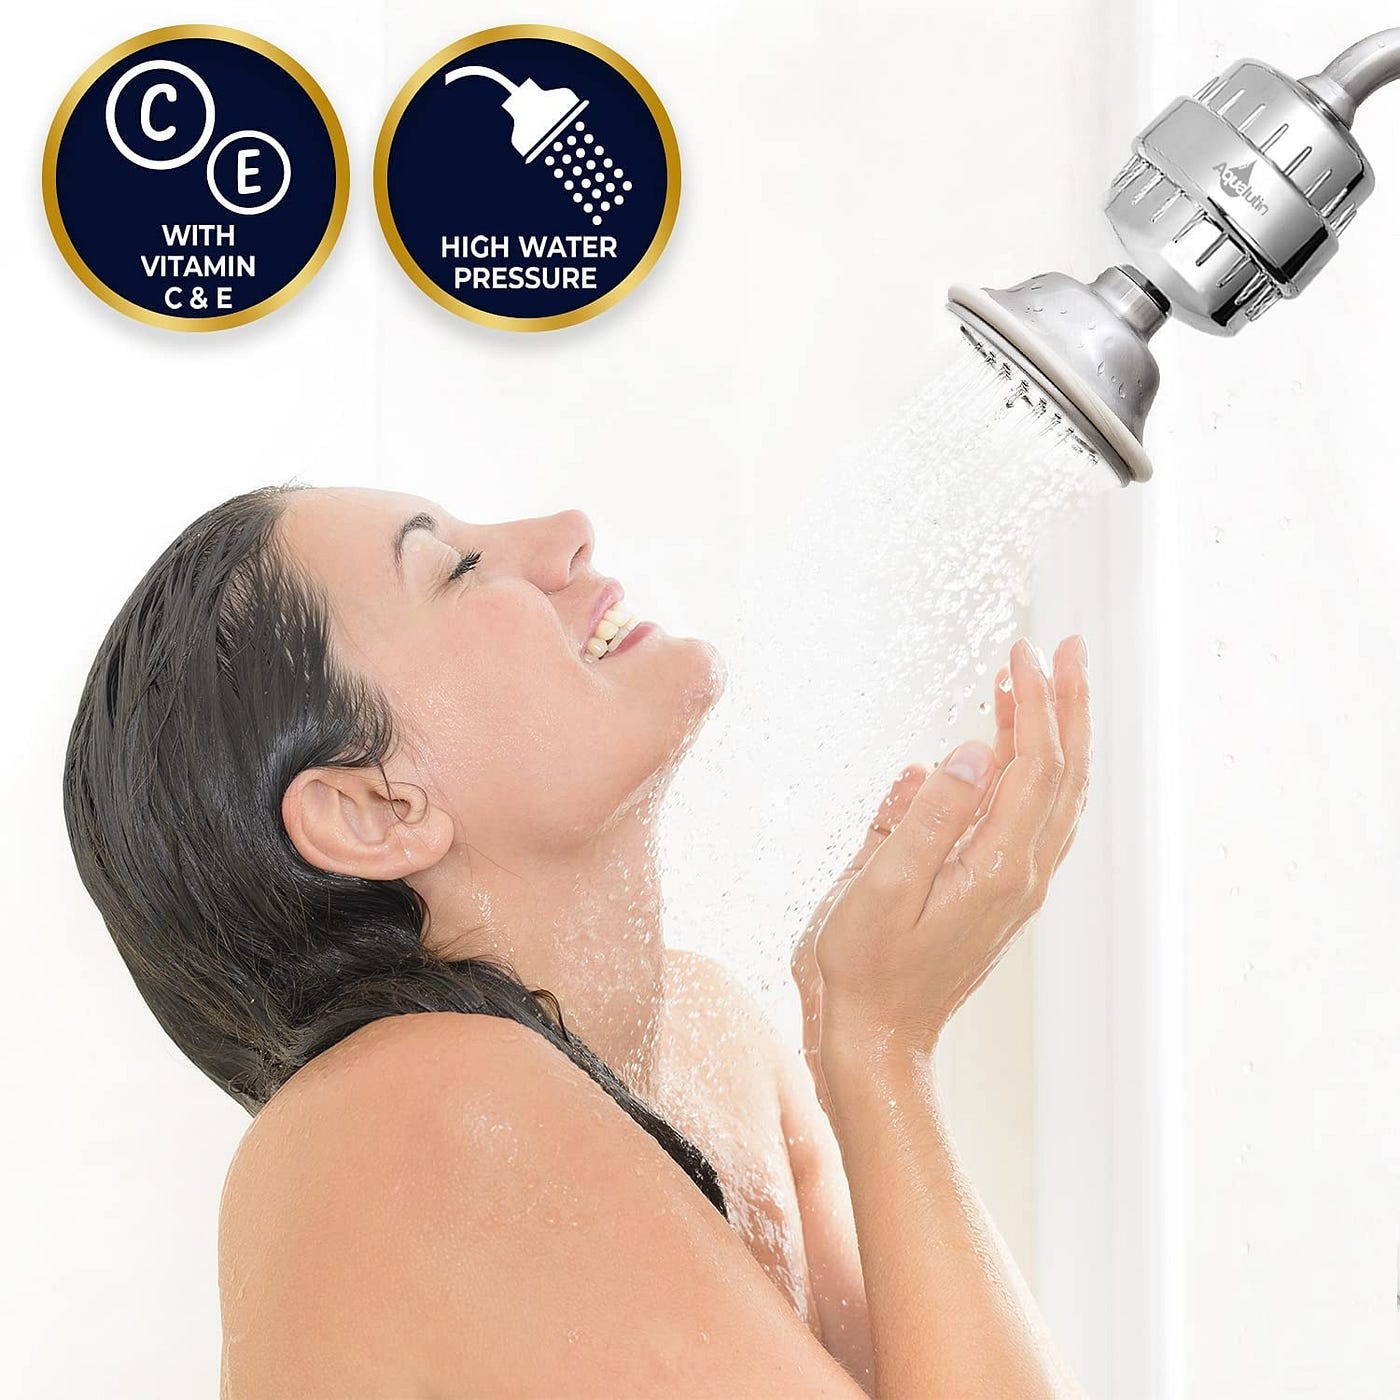 AQUALUTIO 15 Stage Shower Filter With Vitamin C — High Output Revitalizing Shower  Head — Purifier Bathroom Filtration System For Hard Water, Chlorine, Heavy  Metals & Odors [Extra Cartridge Included], by Ethan Brown